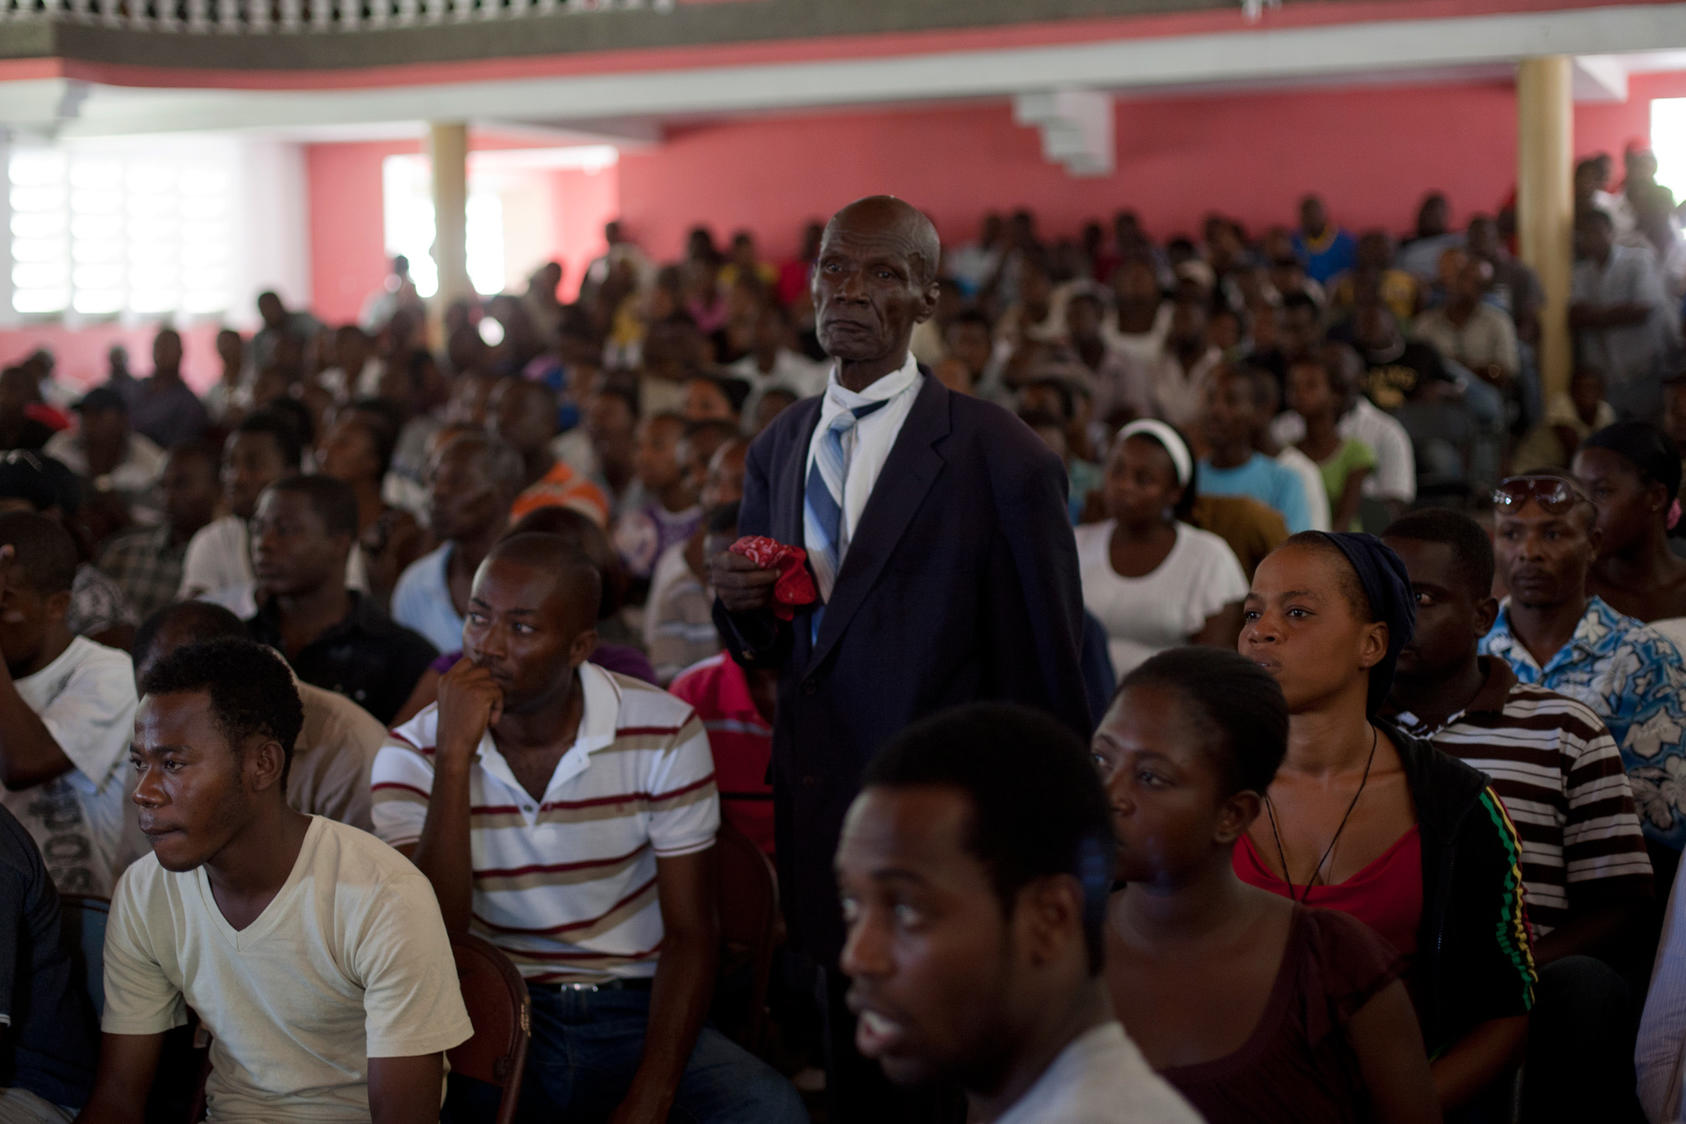 The audience of a courtroom during a trial of police officers, who are charged with murder or attempted murder in connection with a prison massacre last year, at the Catholic Cultural Center Saint-Louis in Les Cayes, Haiti, Oct. 26, 2011. The trial, now in its third week, is being used by Haiti's new government to show a new rule of law. (Andres Martinez Casares/The New York Times)